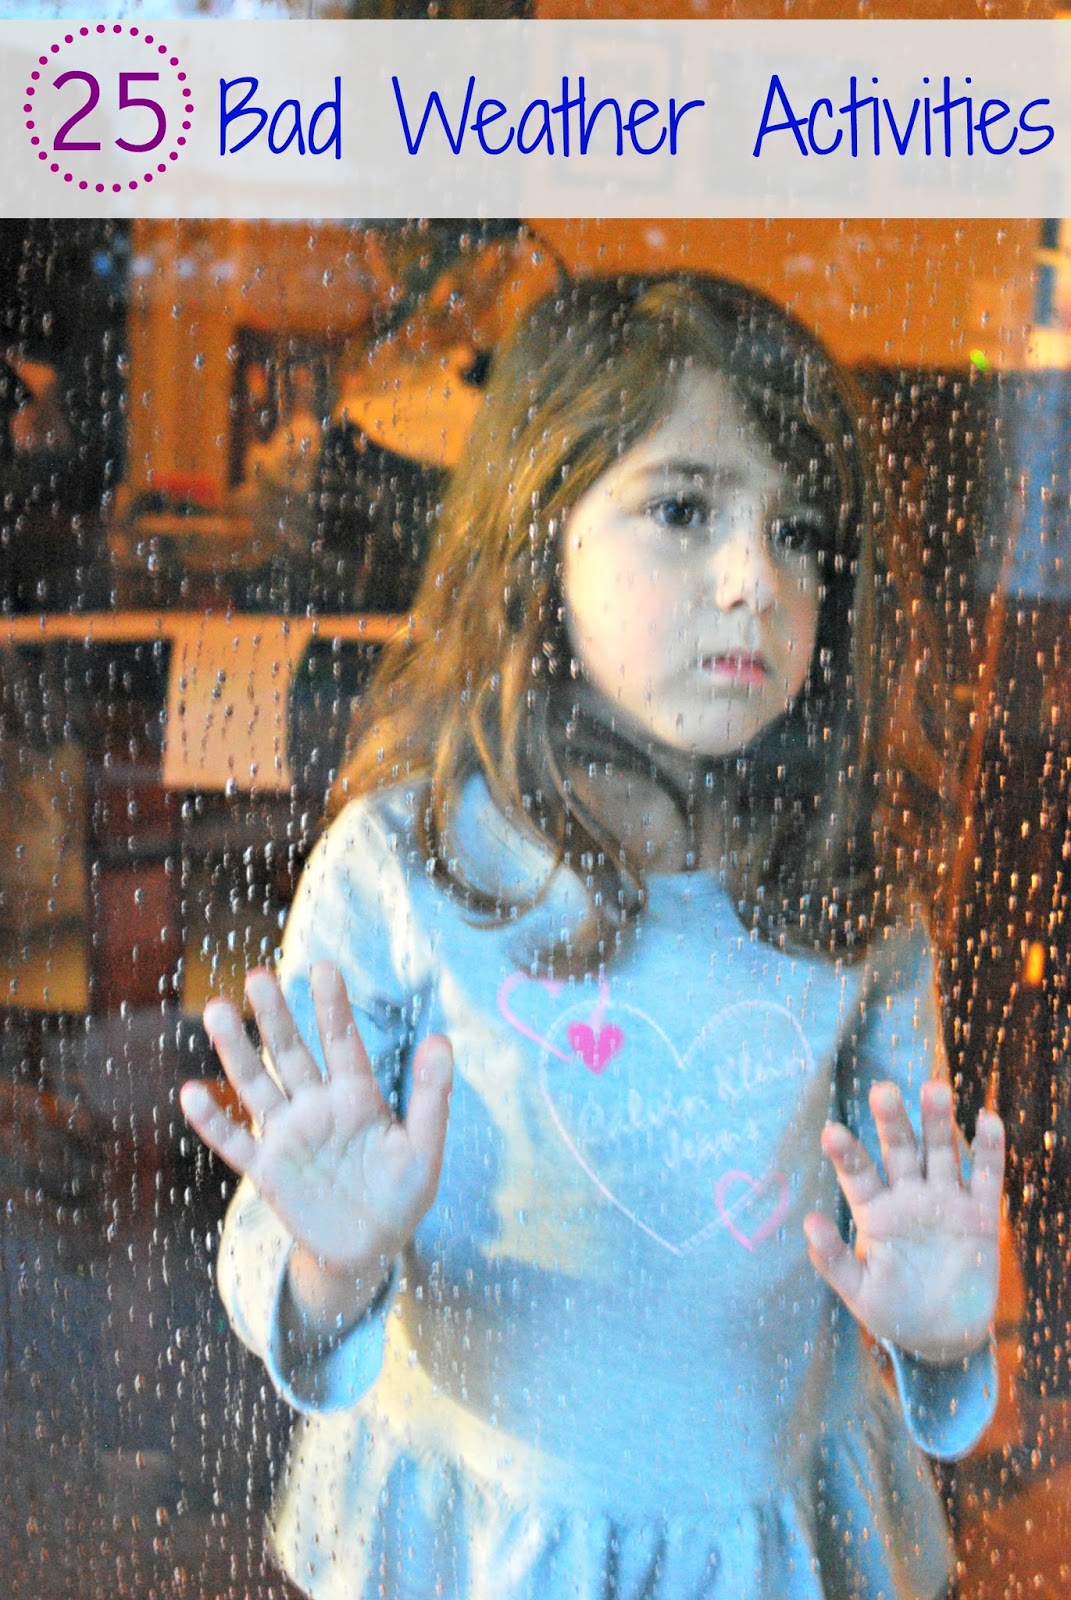 25 Bad Weather Activities - Ideas using stuff you already have at home to keep the kids from going stir crazy.